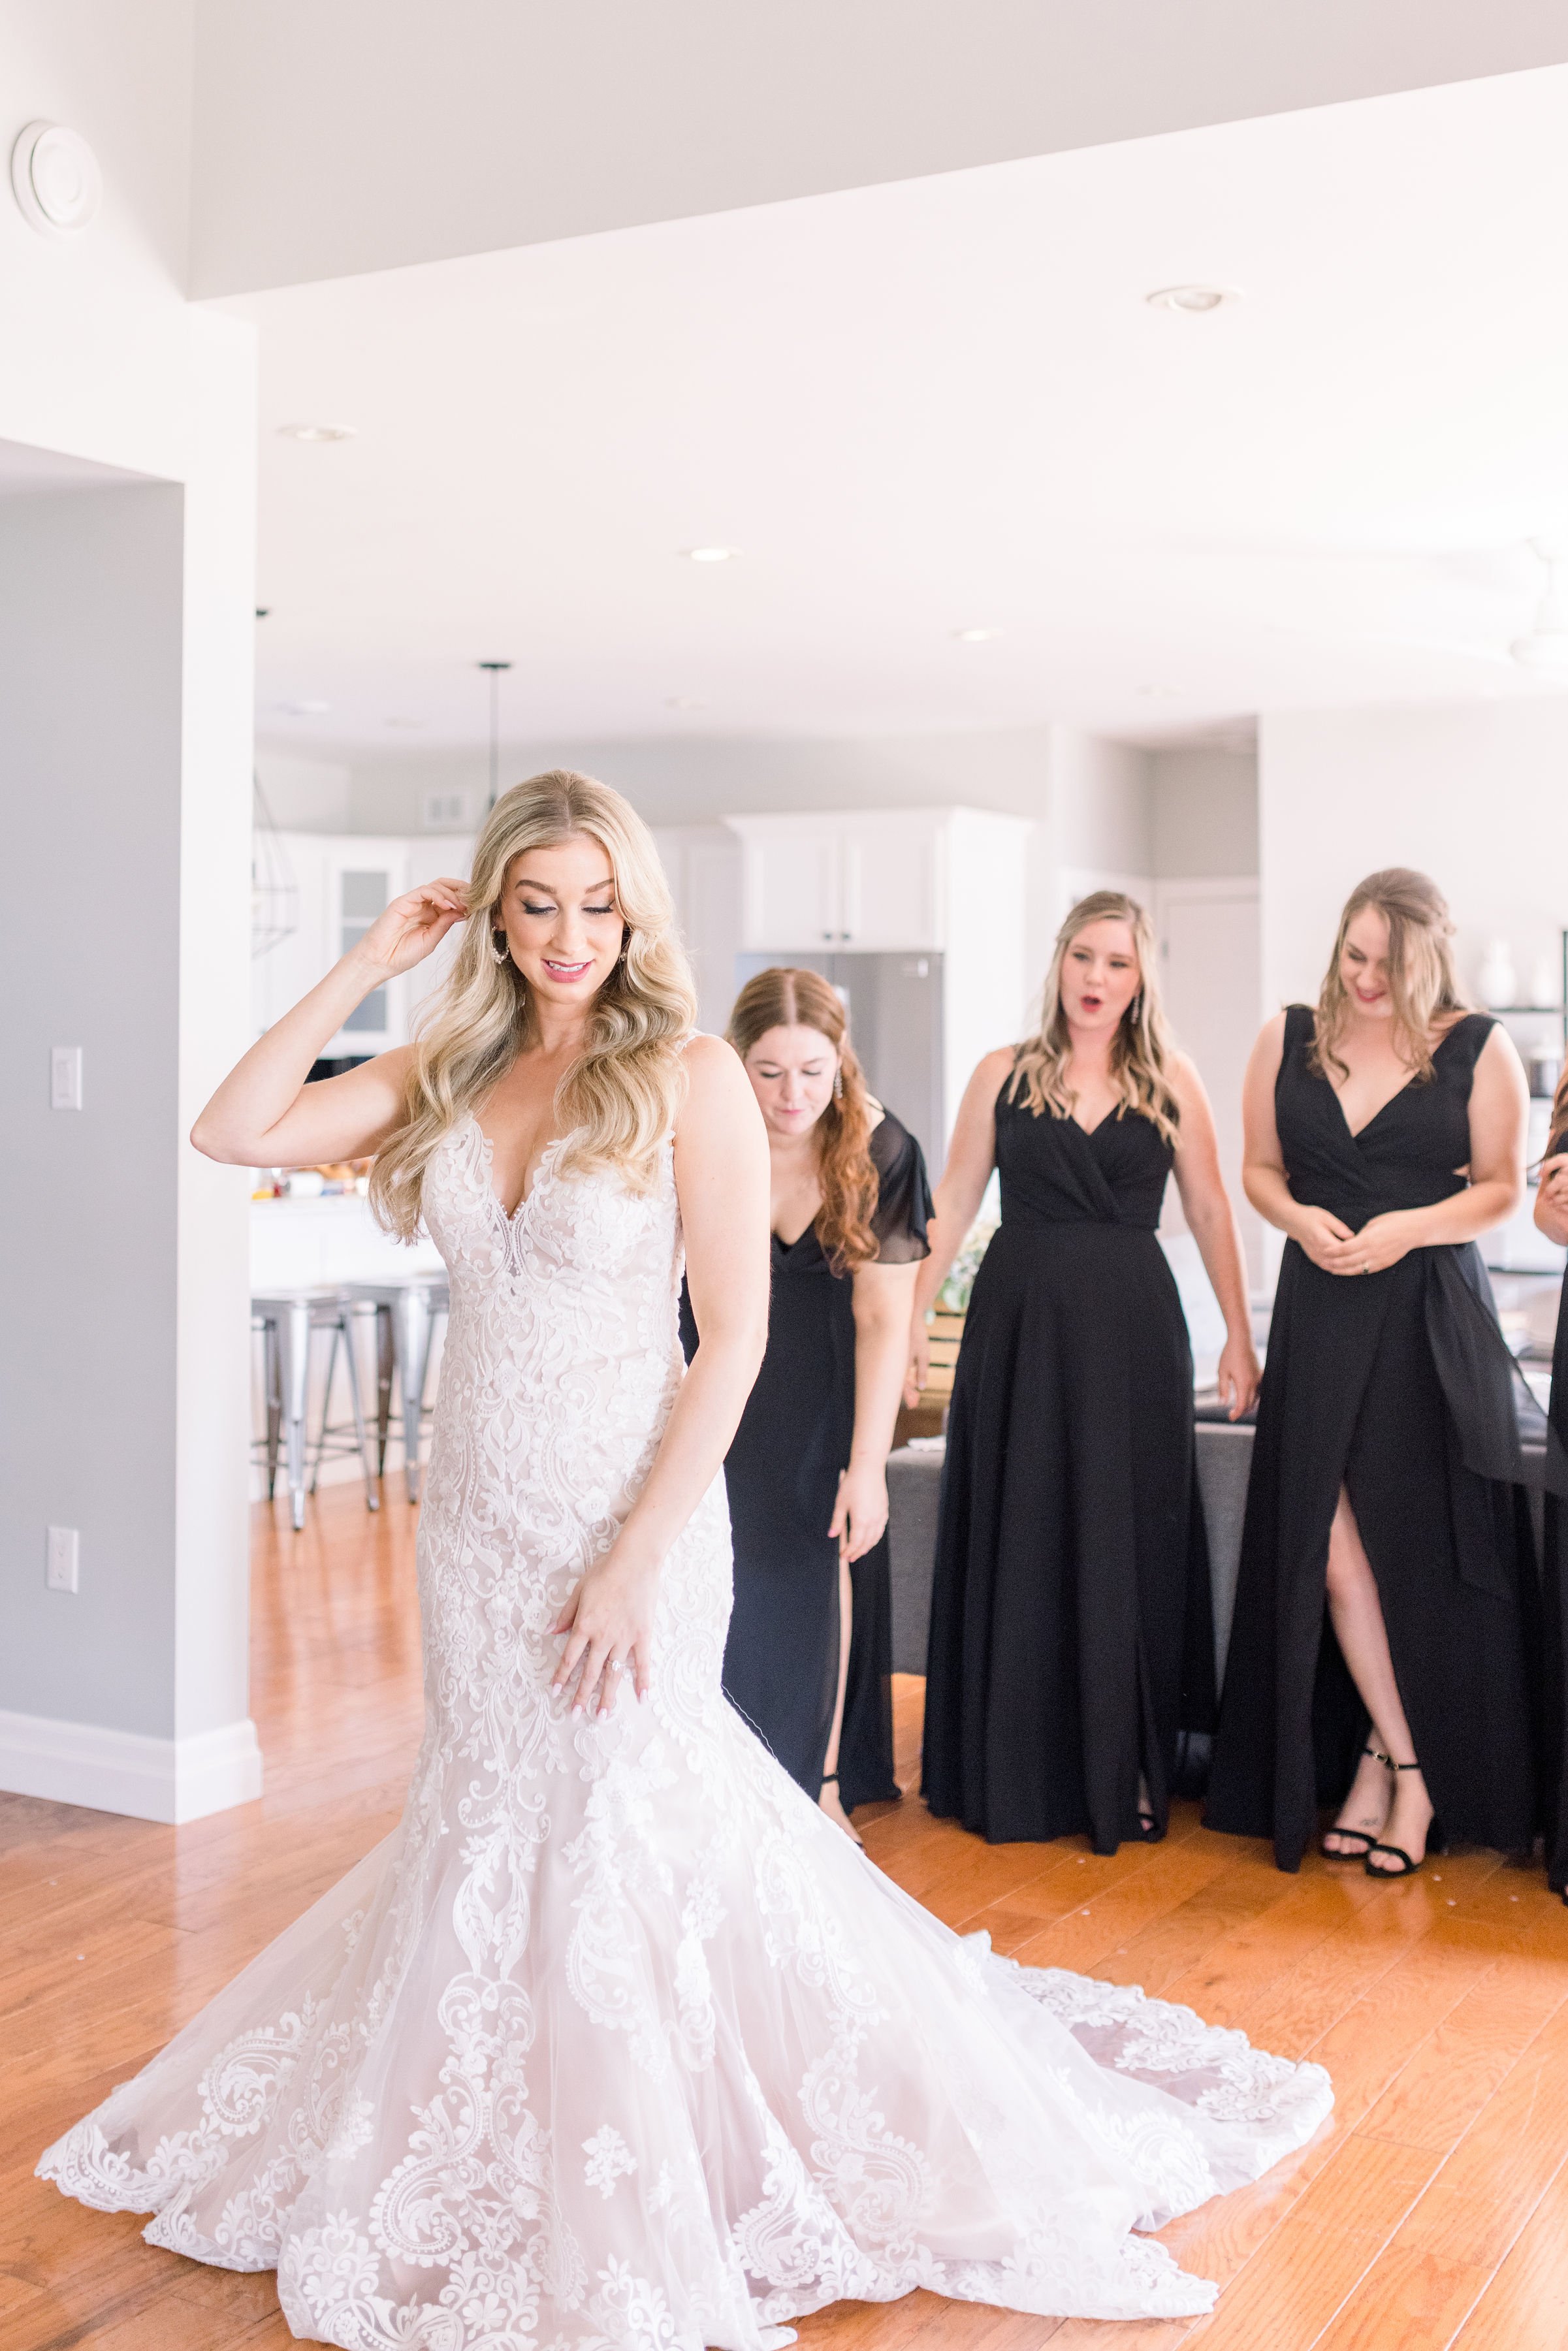  During a wedding in Sandbanks, Chelsea Mason Photography captures a bride twirling for the bridesmaids. mermaid wedding gown #ChelseaMasonPhotography #ChelseaMasonWeddings #PrinceEdwardsCountyWeddings #SandbanksWeddings #ONweddingphotographer 